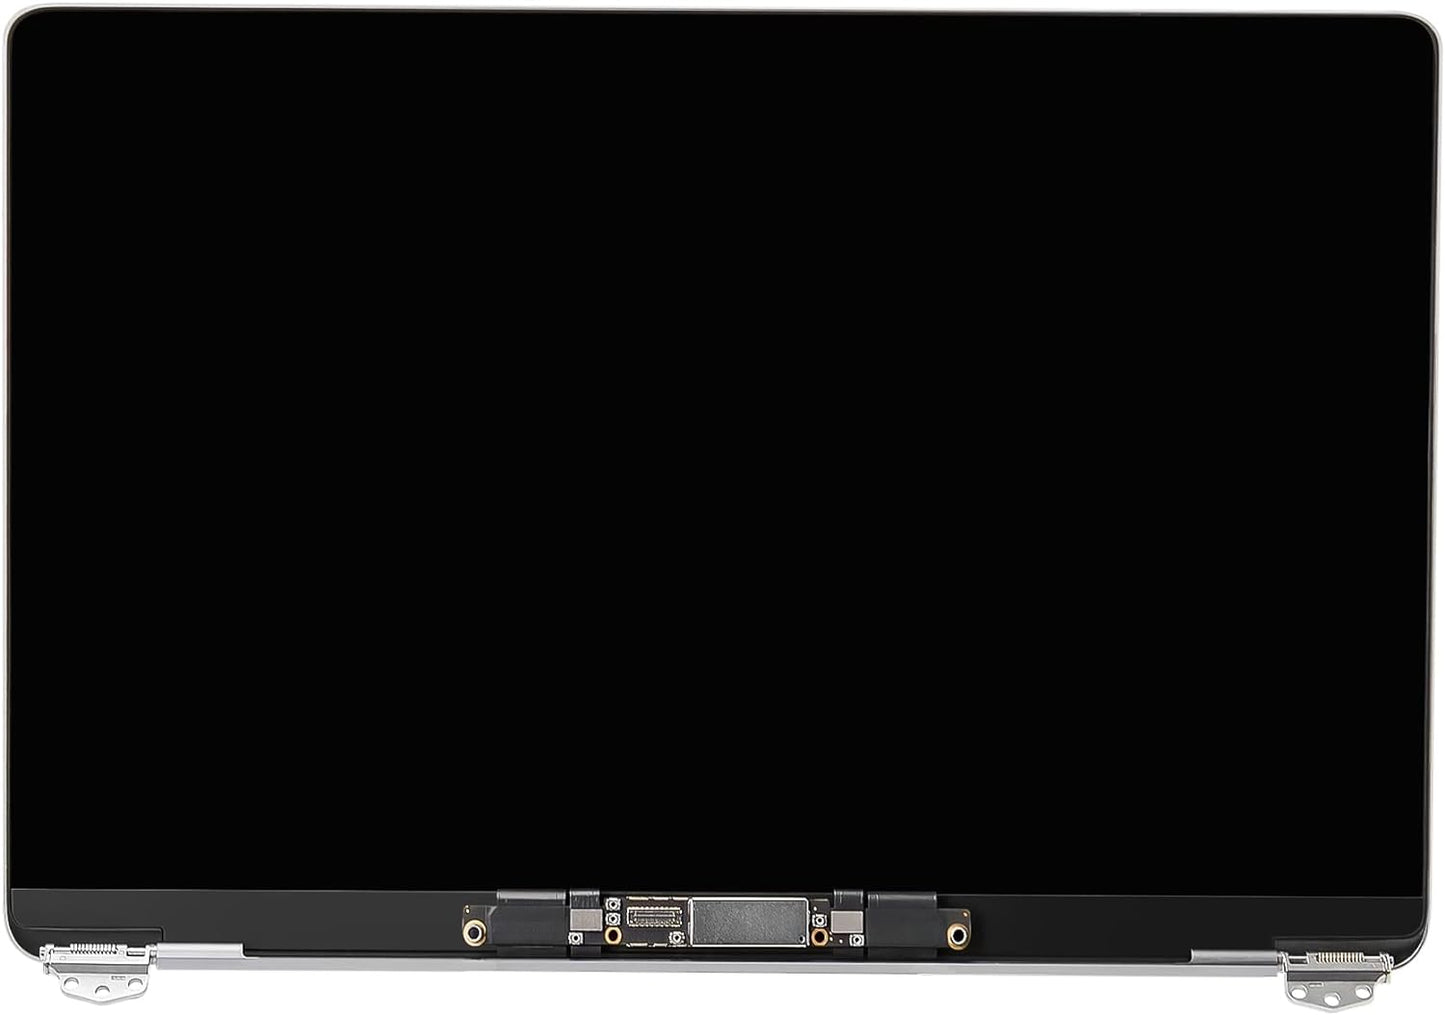 A2337 LCD Screen Display Assembly Replacement Compatible With MacBook Air 13.3 Inch Retina M1 2020 Year